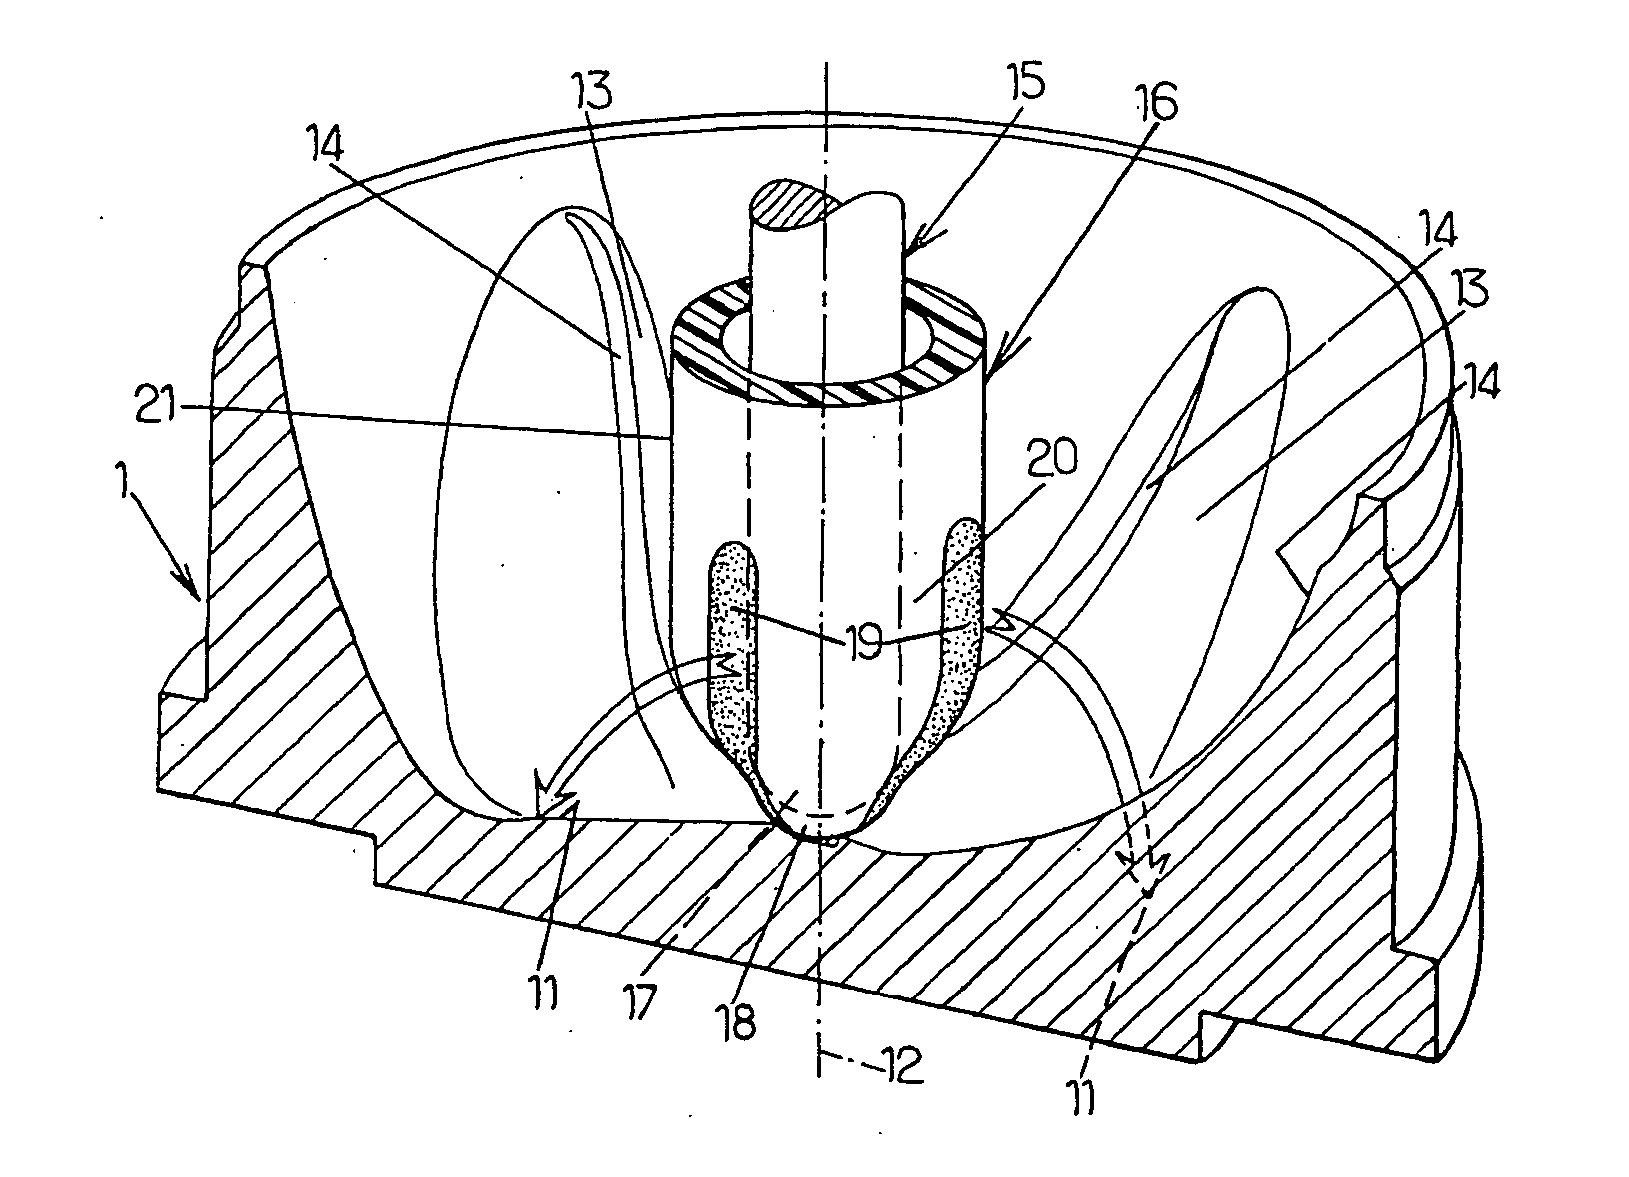 Drawing-blowing method and device for molding thermoplastic material containers, in particular bottles, with petaloid bottoms